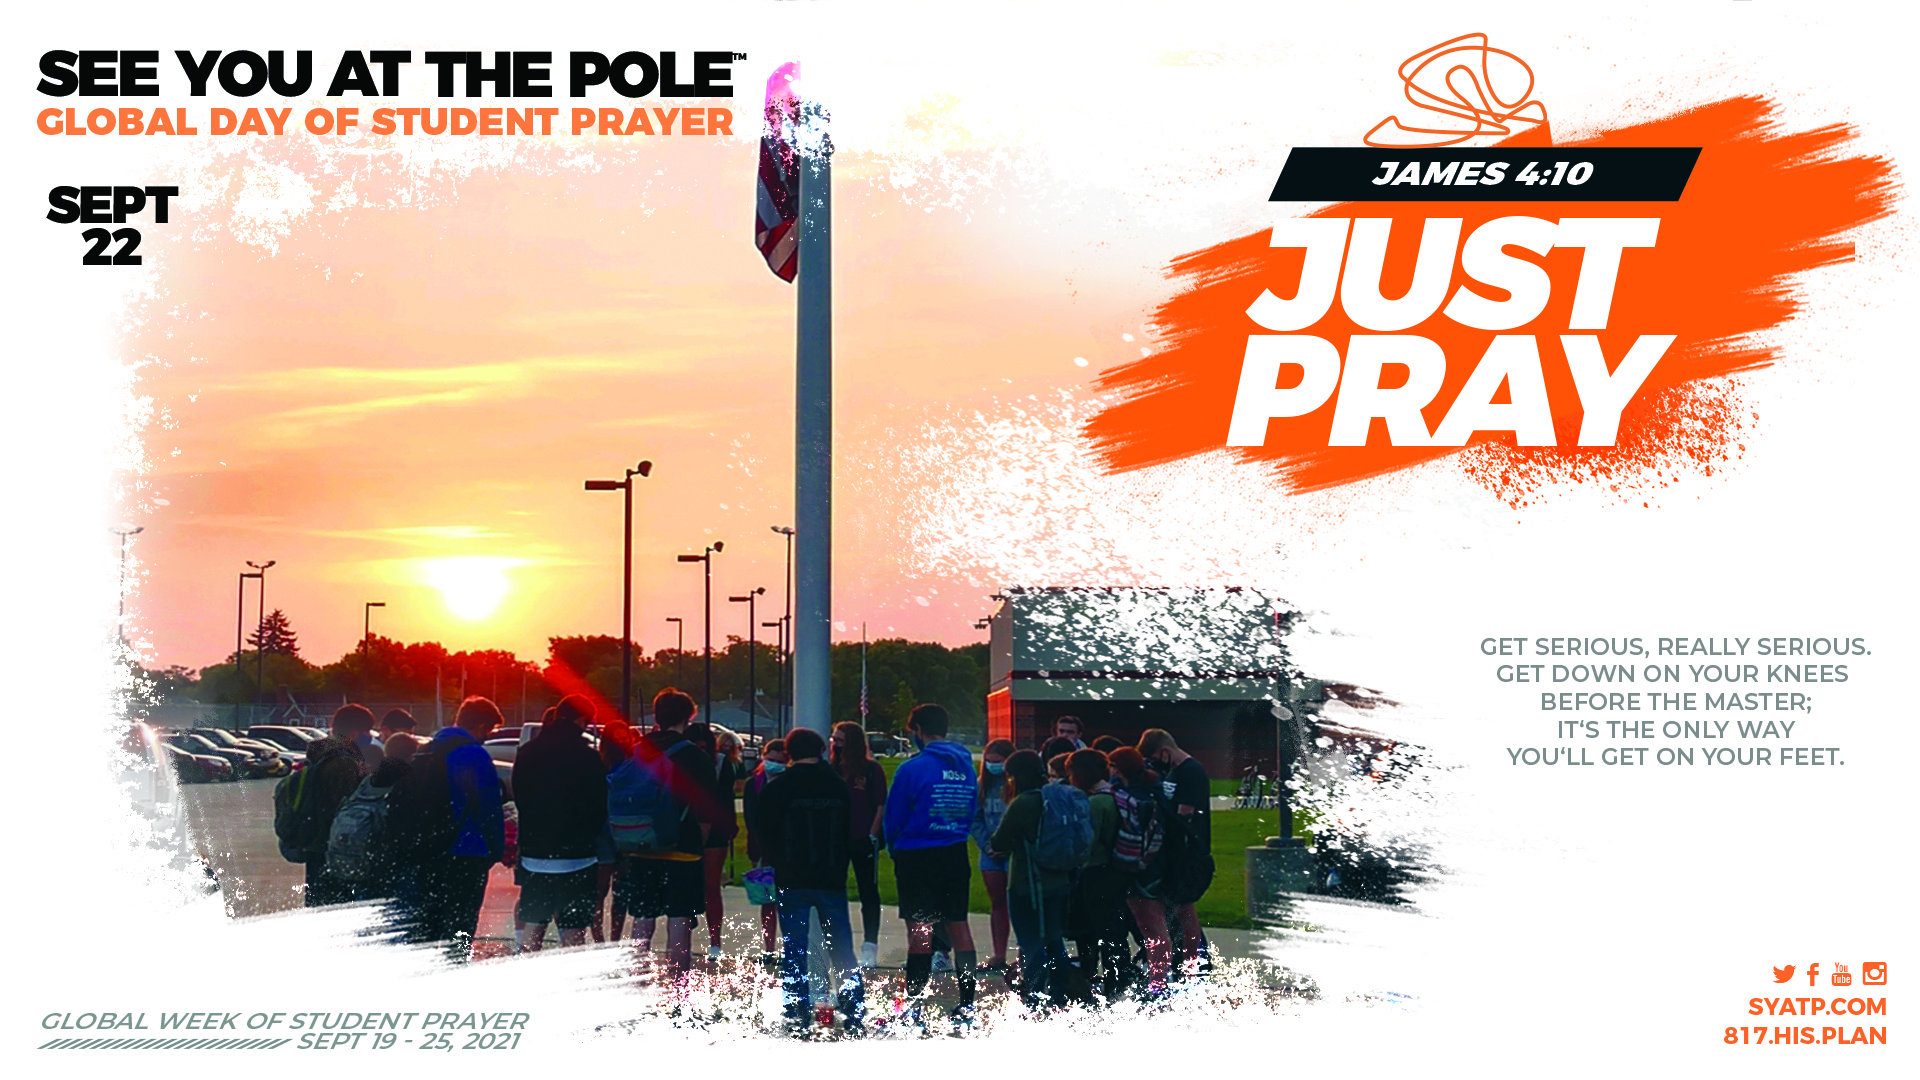 See You at the Pole 2021 - This is an annual event where students meet at the flag pole of their school for student lead prayer. #SYATP #SYATP2021 #SeeYouAtThePole